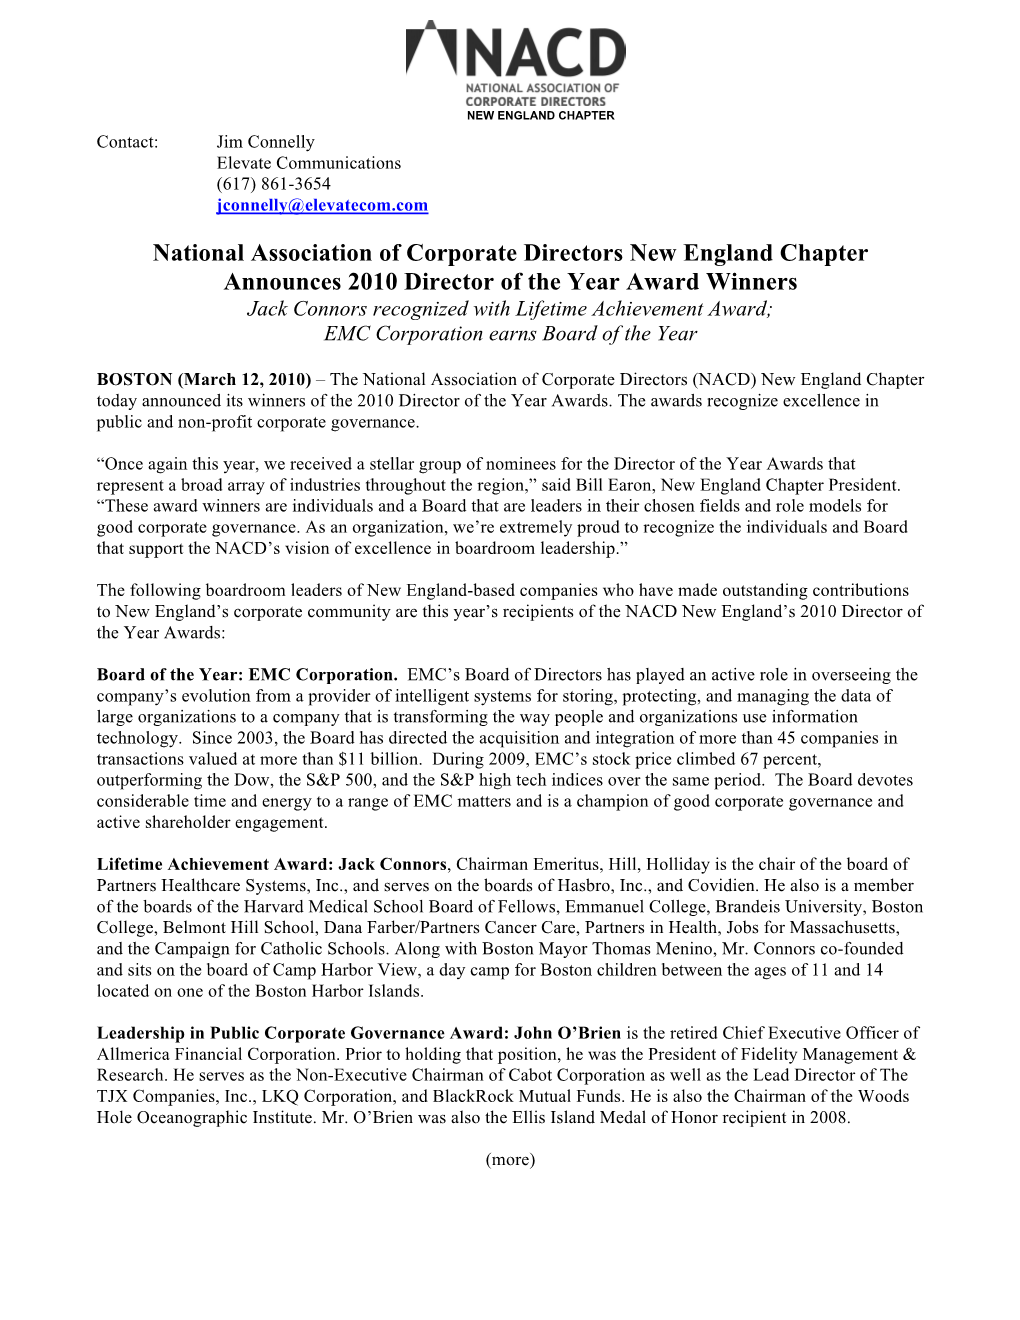 National Association of Corporate Directors New England Chapter Announces 2010 Director of the Year Award Winners